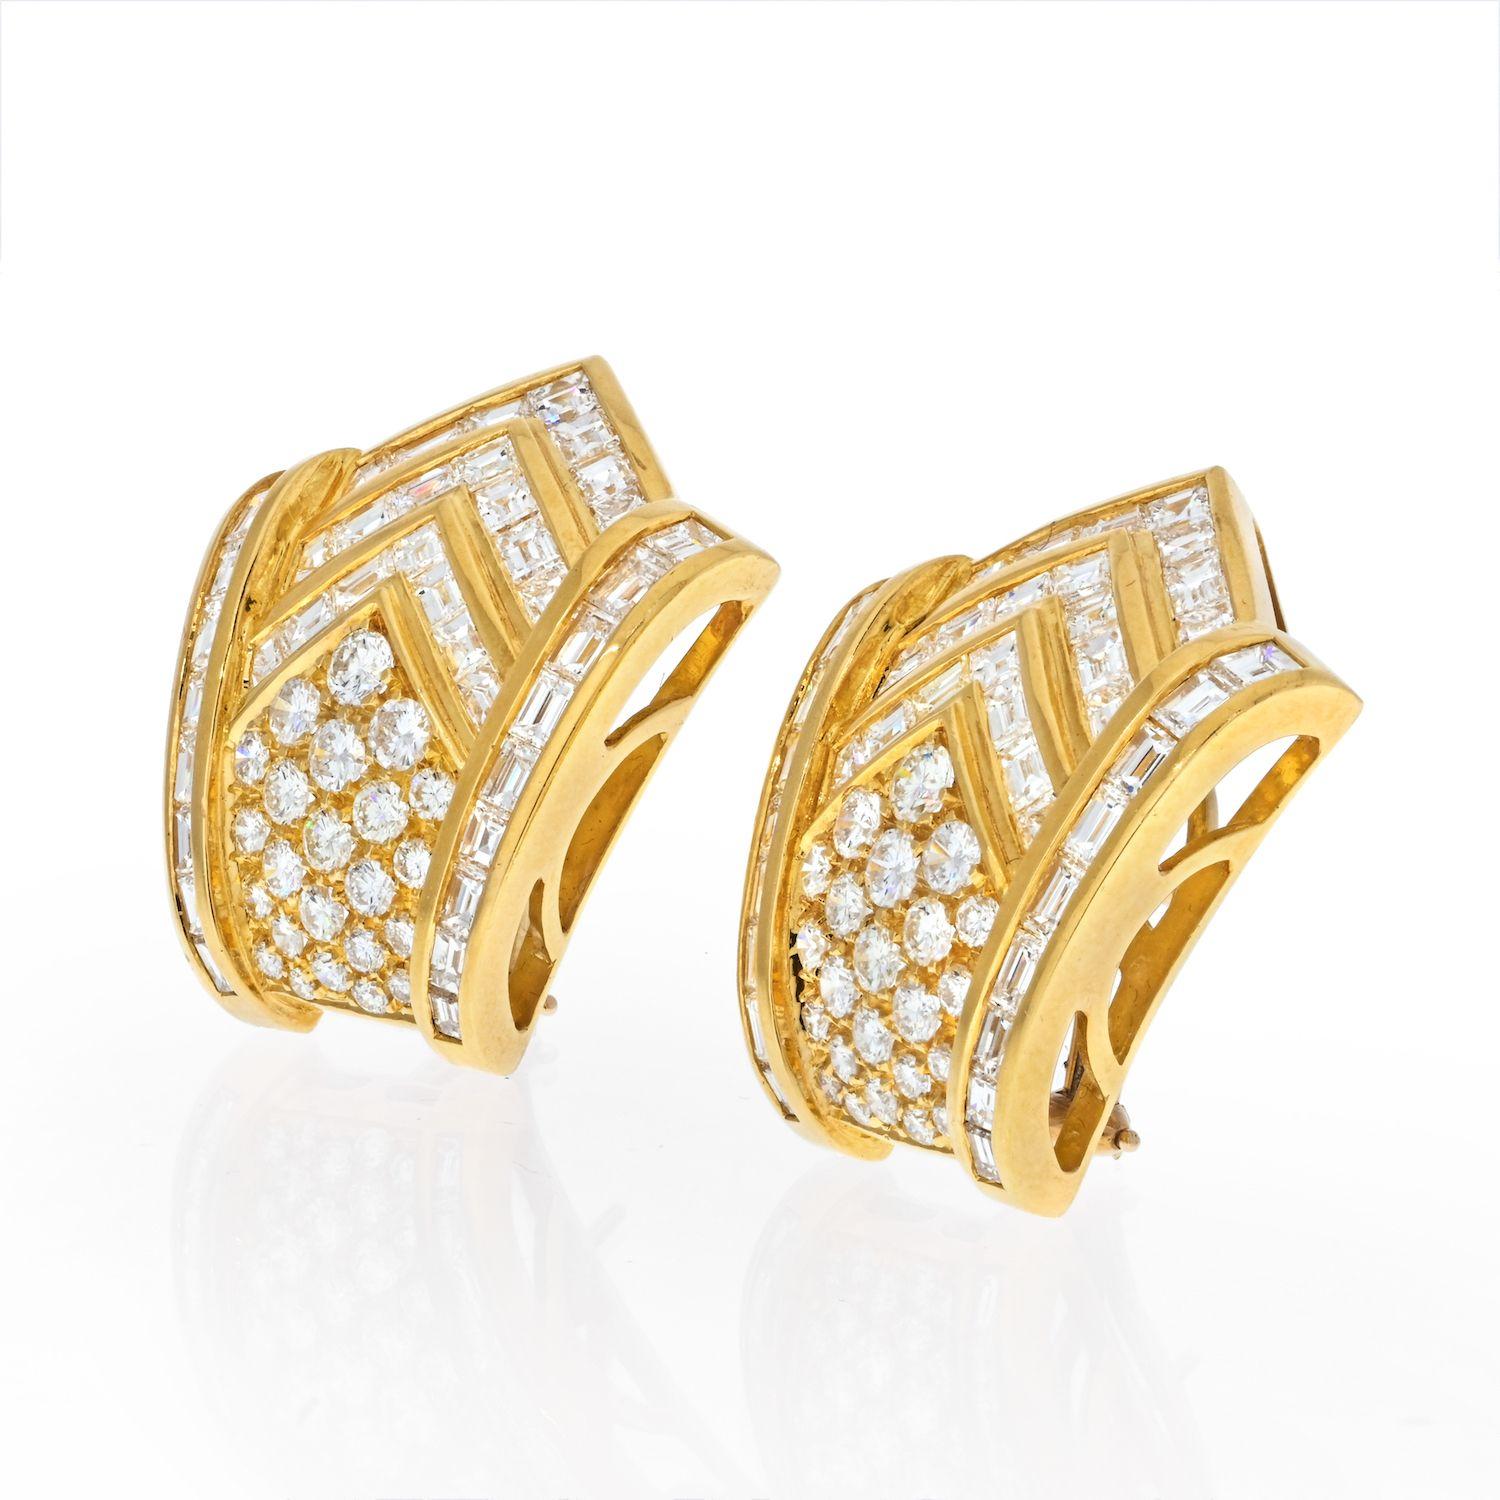 Attractive estate baguette and round cut diamond earrings. Each consisting of channel set lines of baguette diamonds and top quality prong set round diamonds. The latter are prong set so they are as snuggly clustered as possible. A very attractive